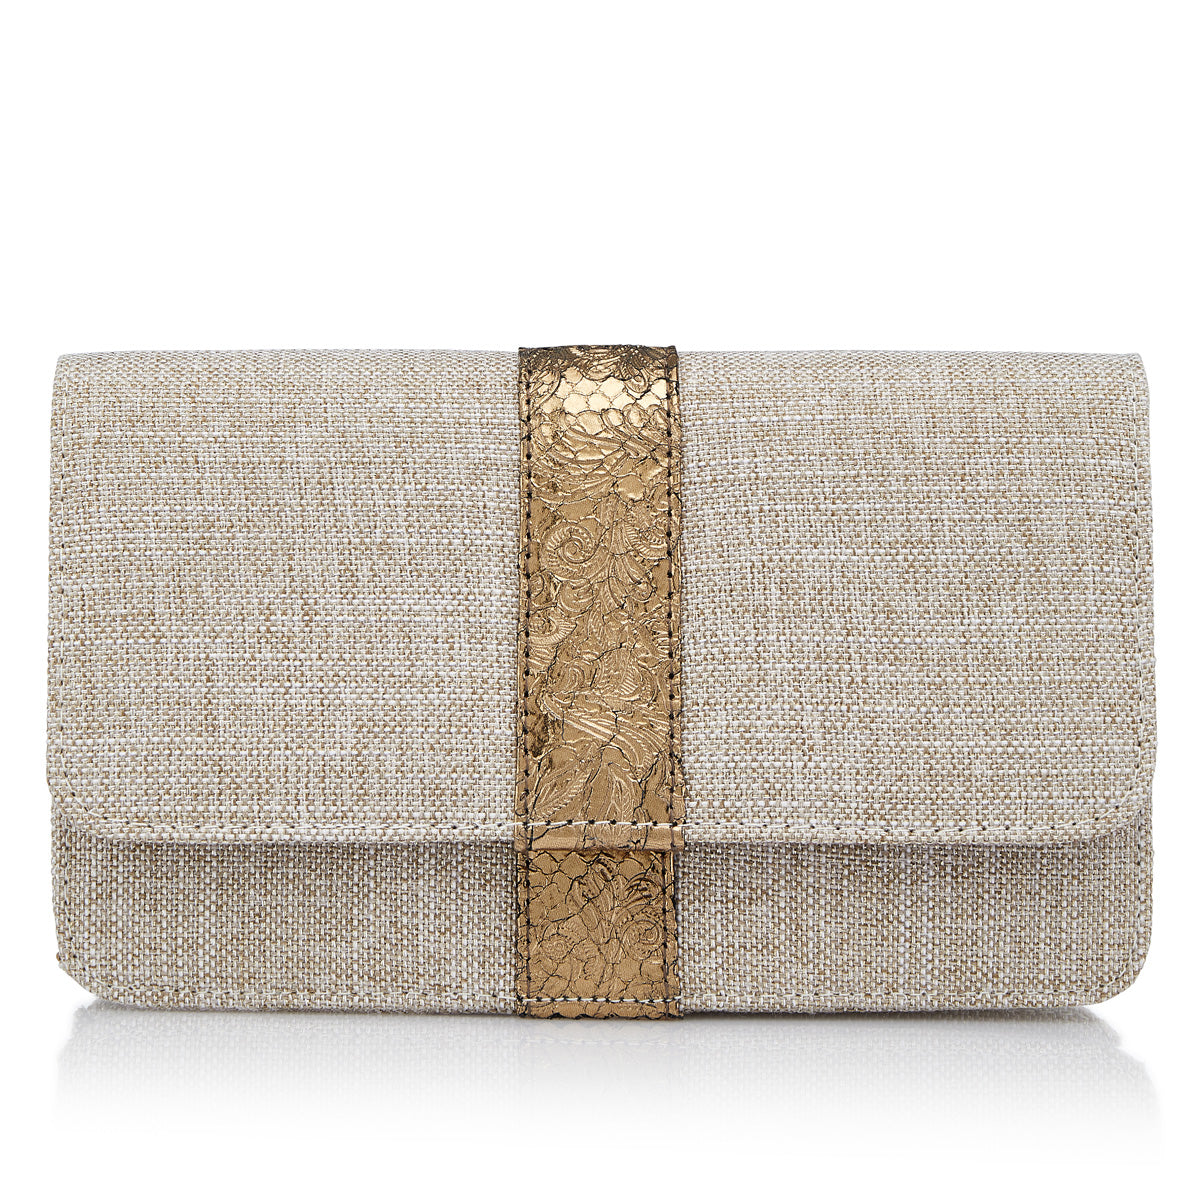 Ecru-colored natural fabric clutch with old gold brocaded central stripe